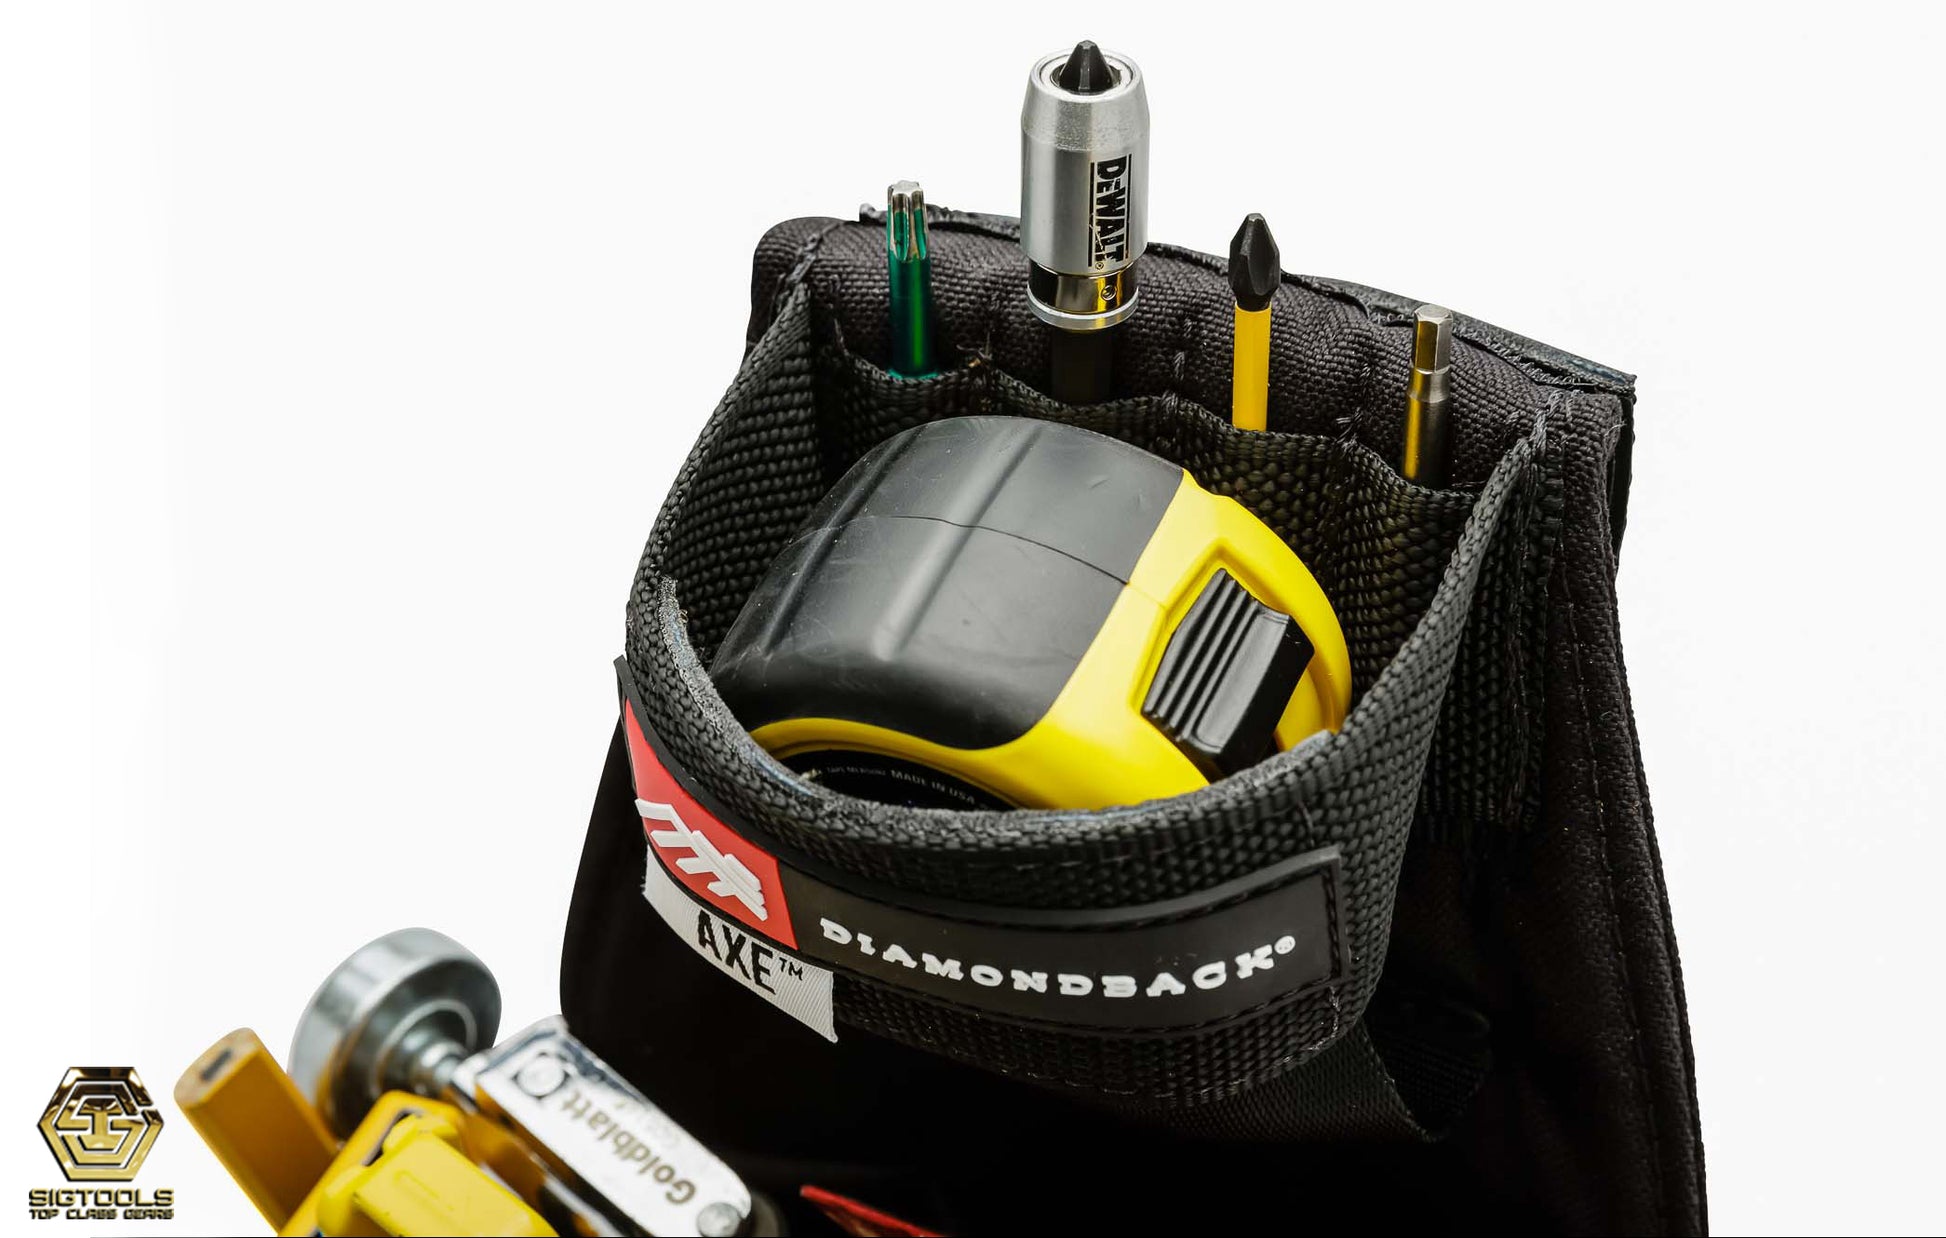 "Diamondback Axe Tool Pouch in Black - Loaded with measuring tape and bits - Left Side - Top View"